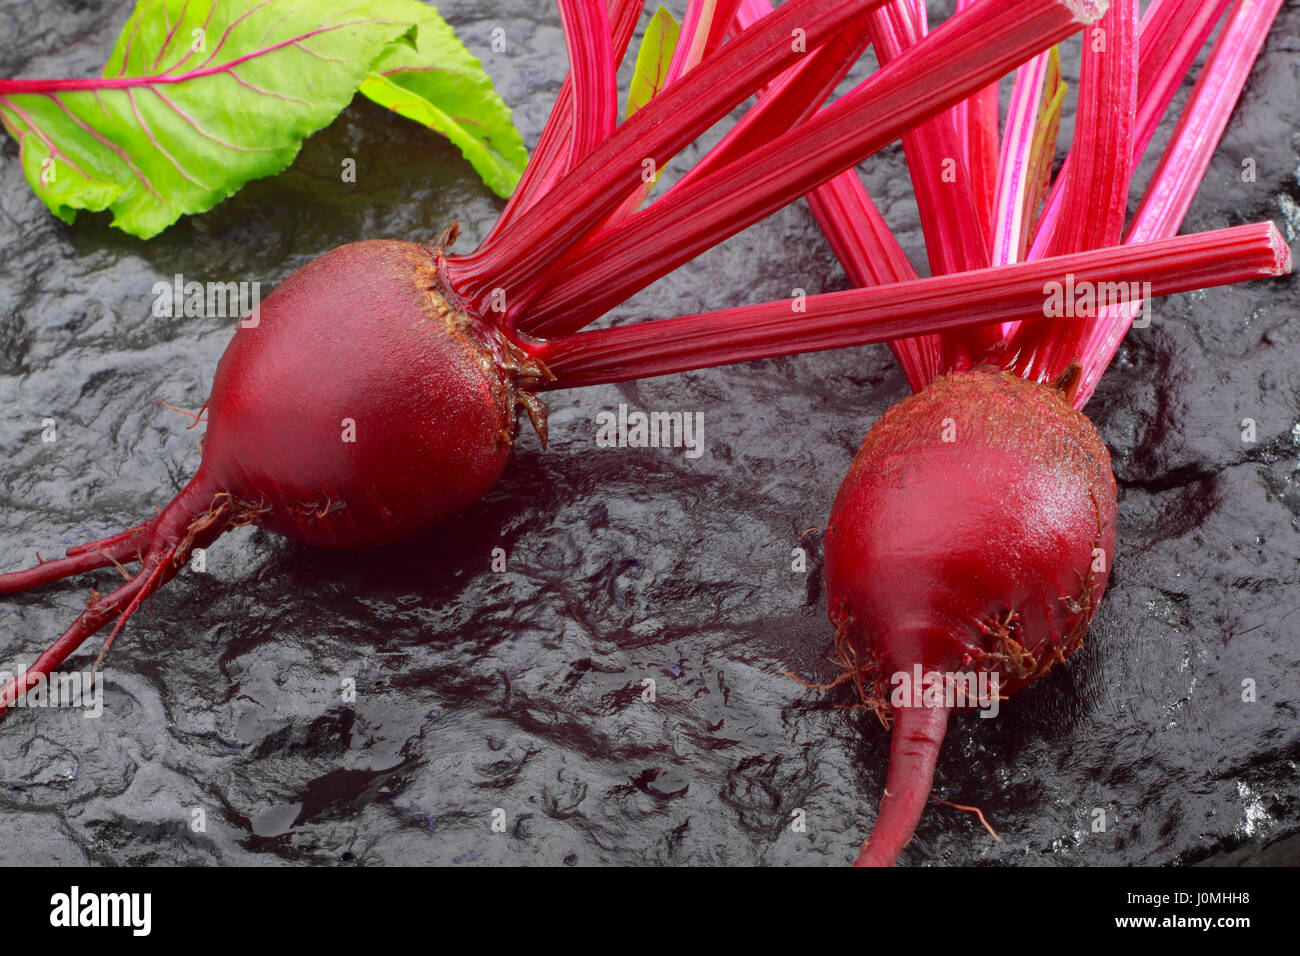 Fresh red beetroot on black painted stone Stock Photo